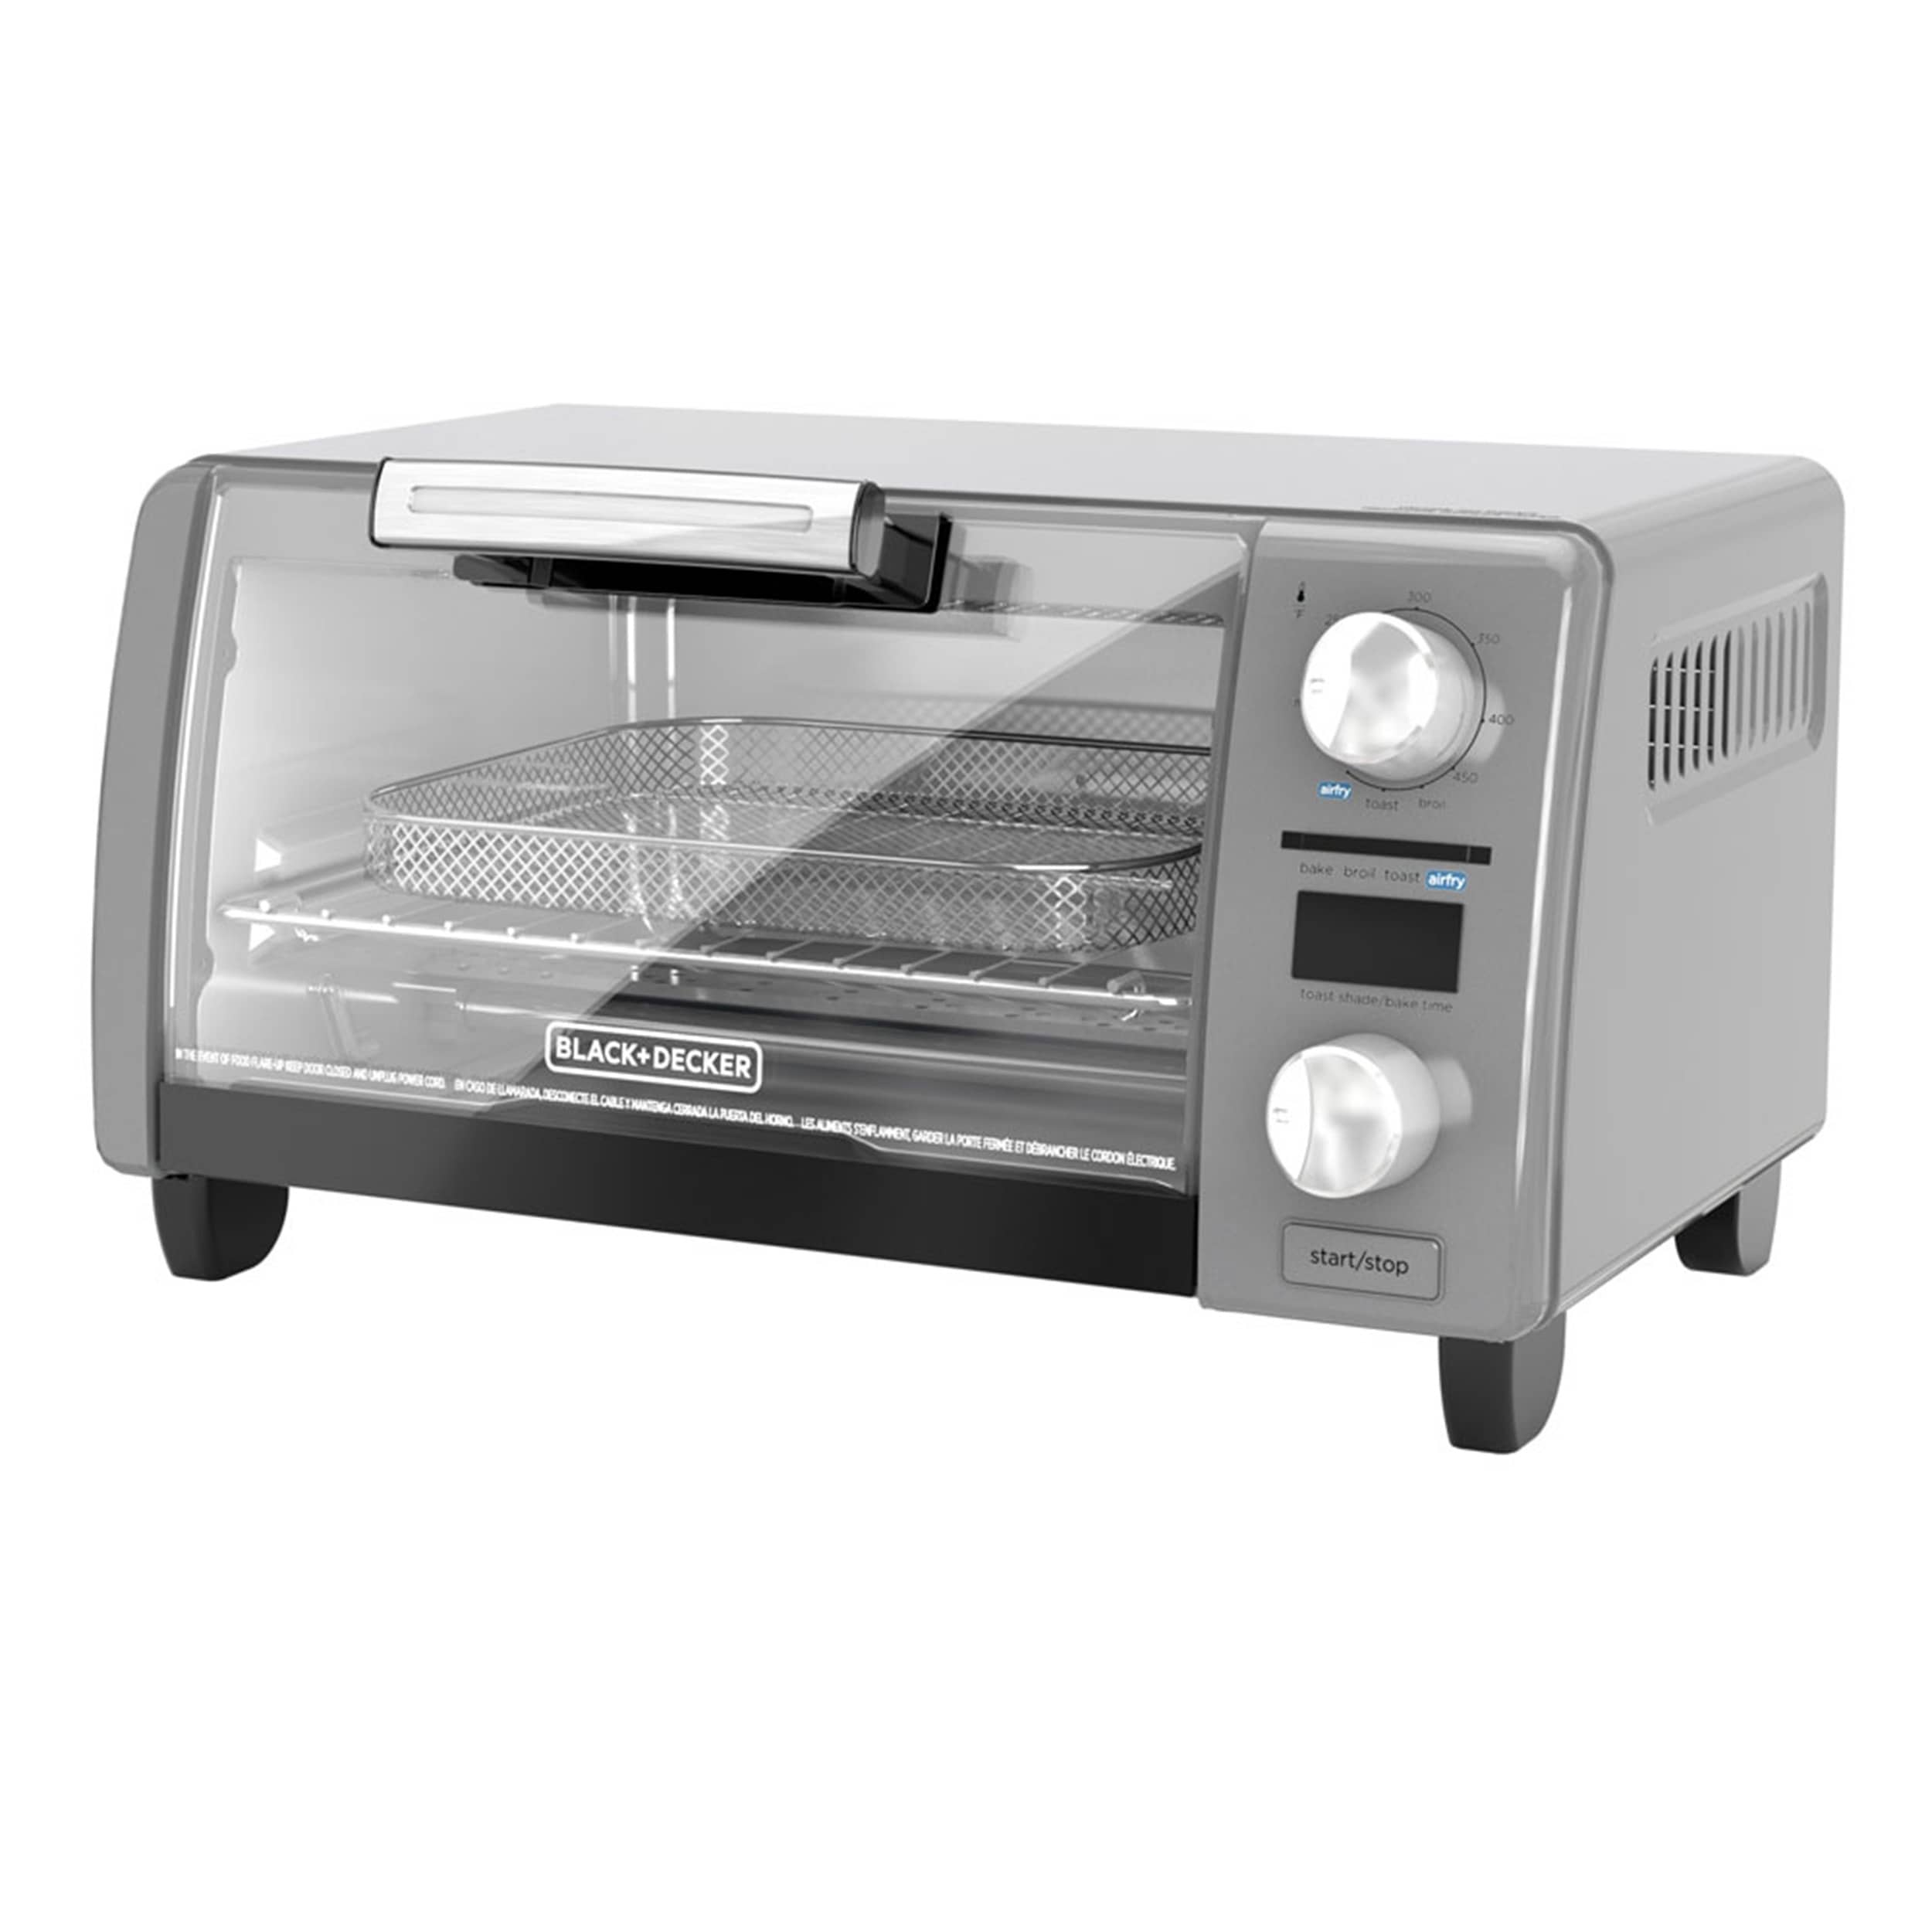 https://ak1.ostkcdn.com/images/products/is/images/direct/21e1693dfd30ff258e8b4a3061d1e50e0daa8ed9/Black-%26-Decker-Crisp-%27N-Bake-Air-Fry-Digital-4-Slice-Toaster-Oven.jpg